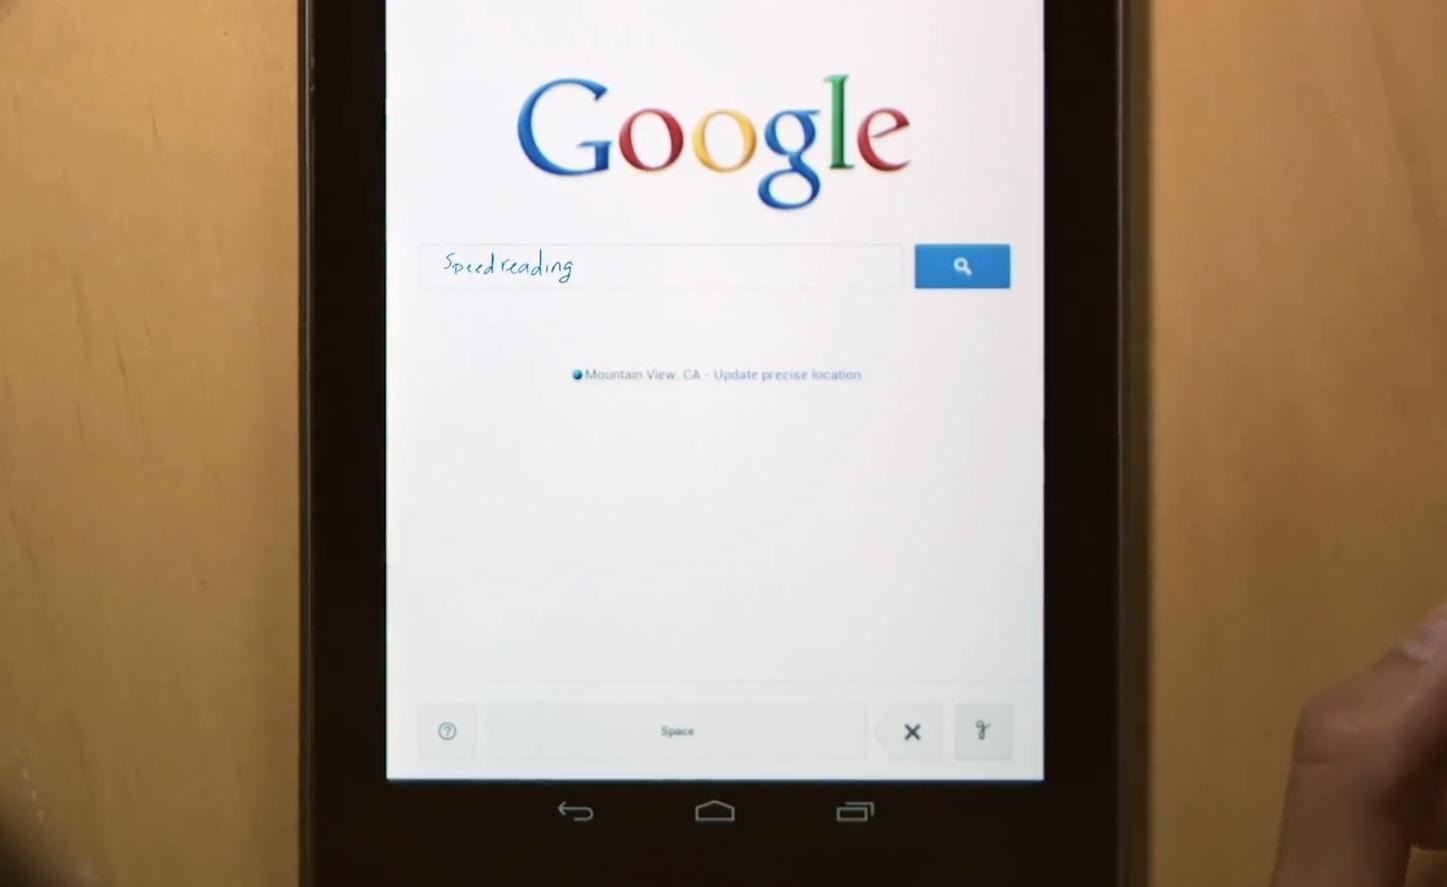 How to Use Google's New Handwrite Mobile Search Feature on Your Smartphone